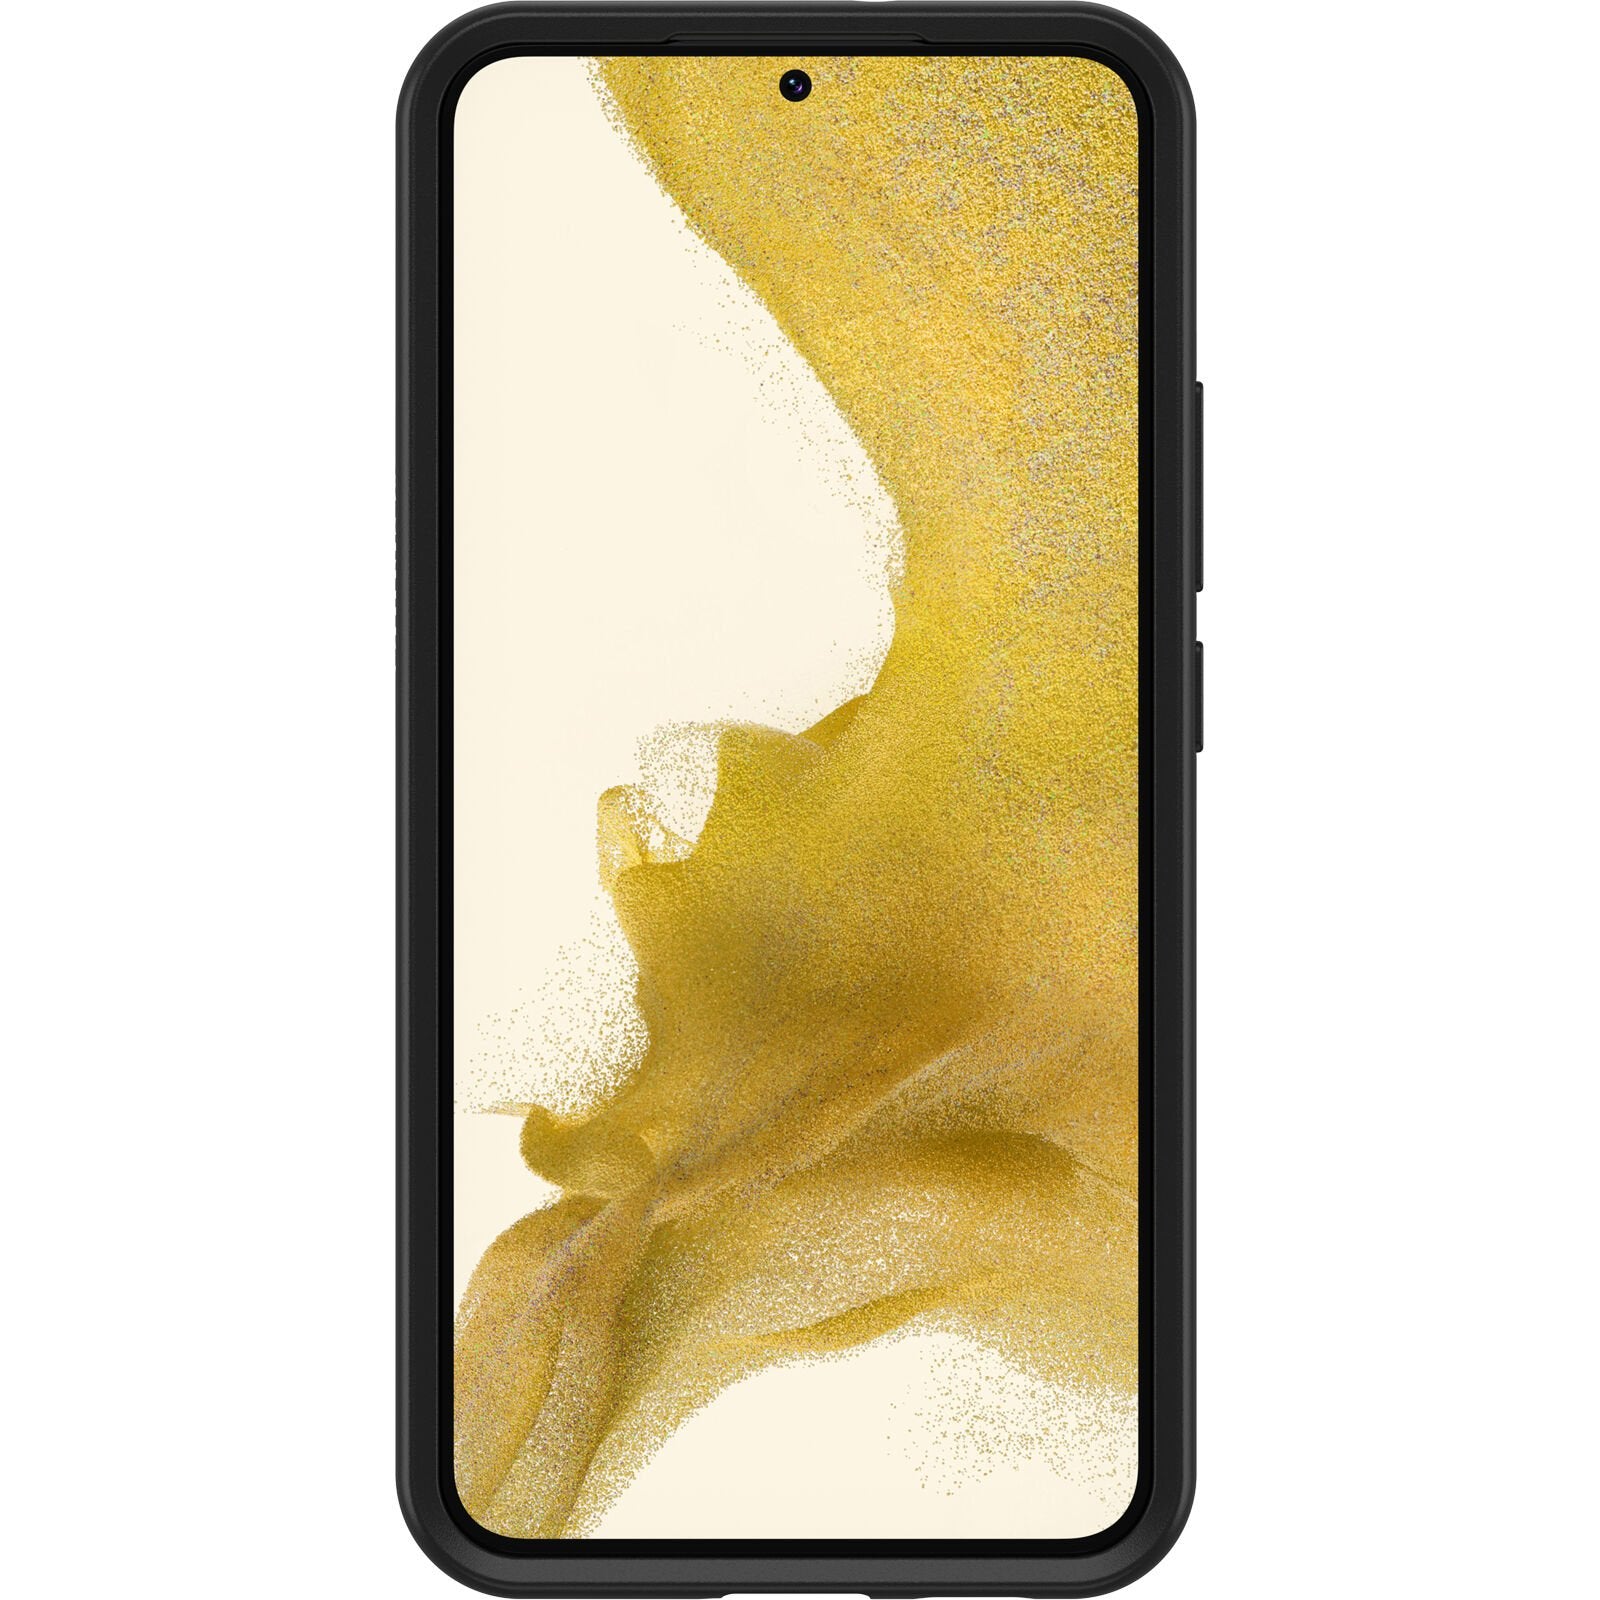 OTTERBOX Samsung Case for Galaxy S22+, Symmetry Series